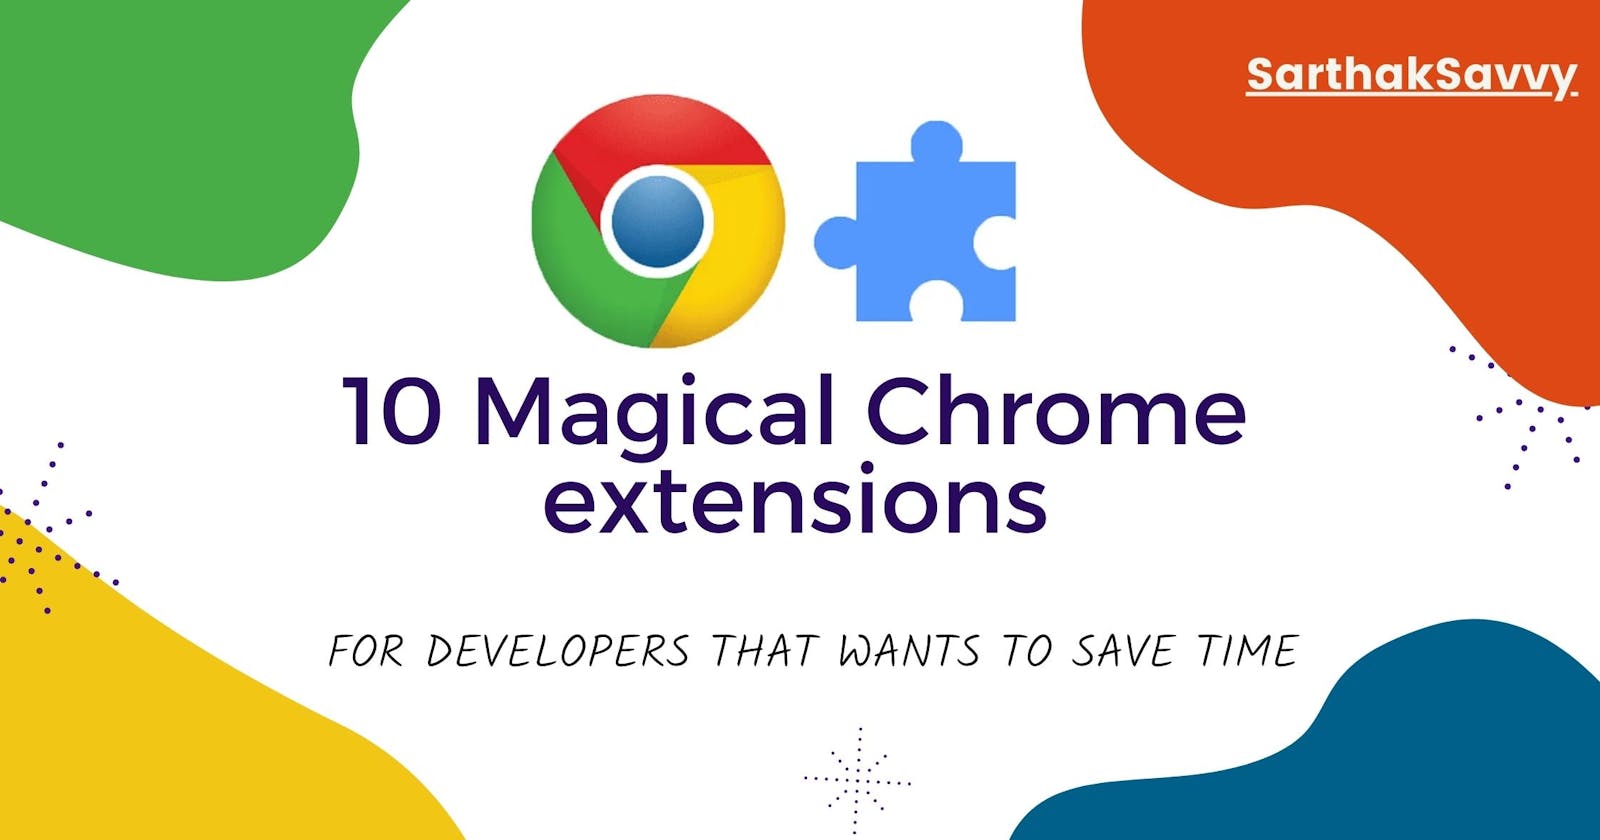 10 magical Chrome extensions for developers